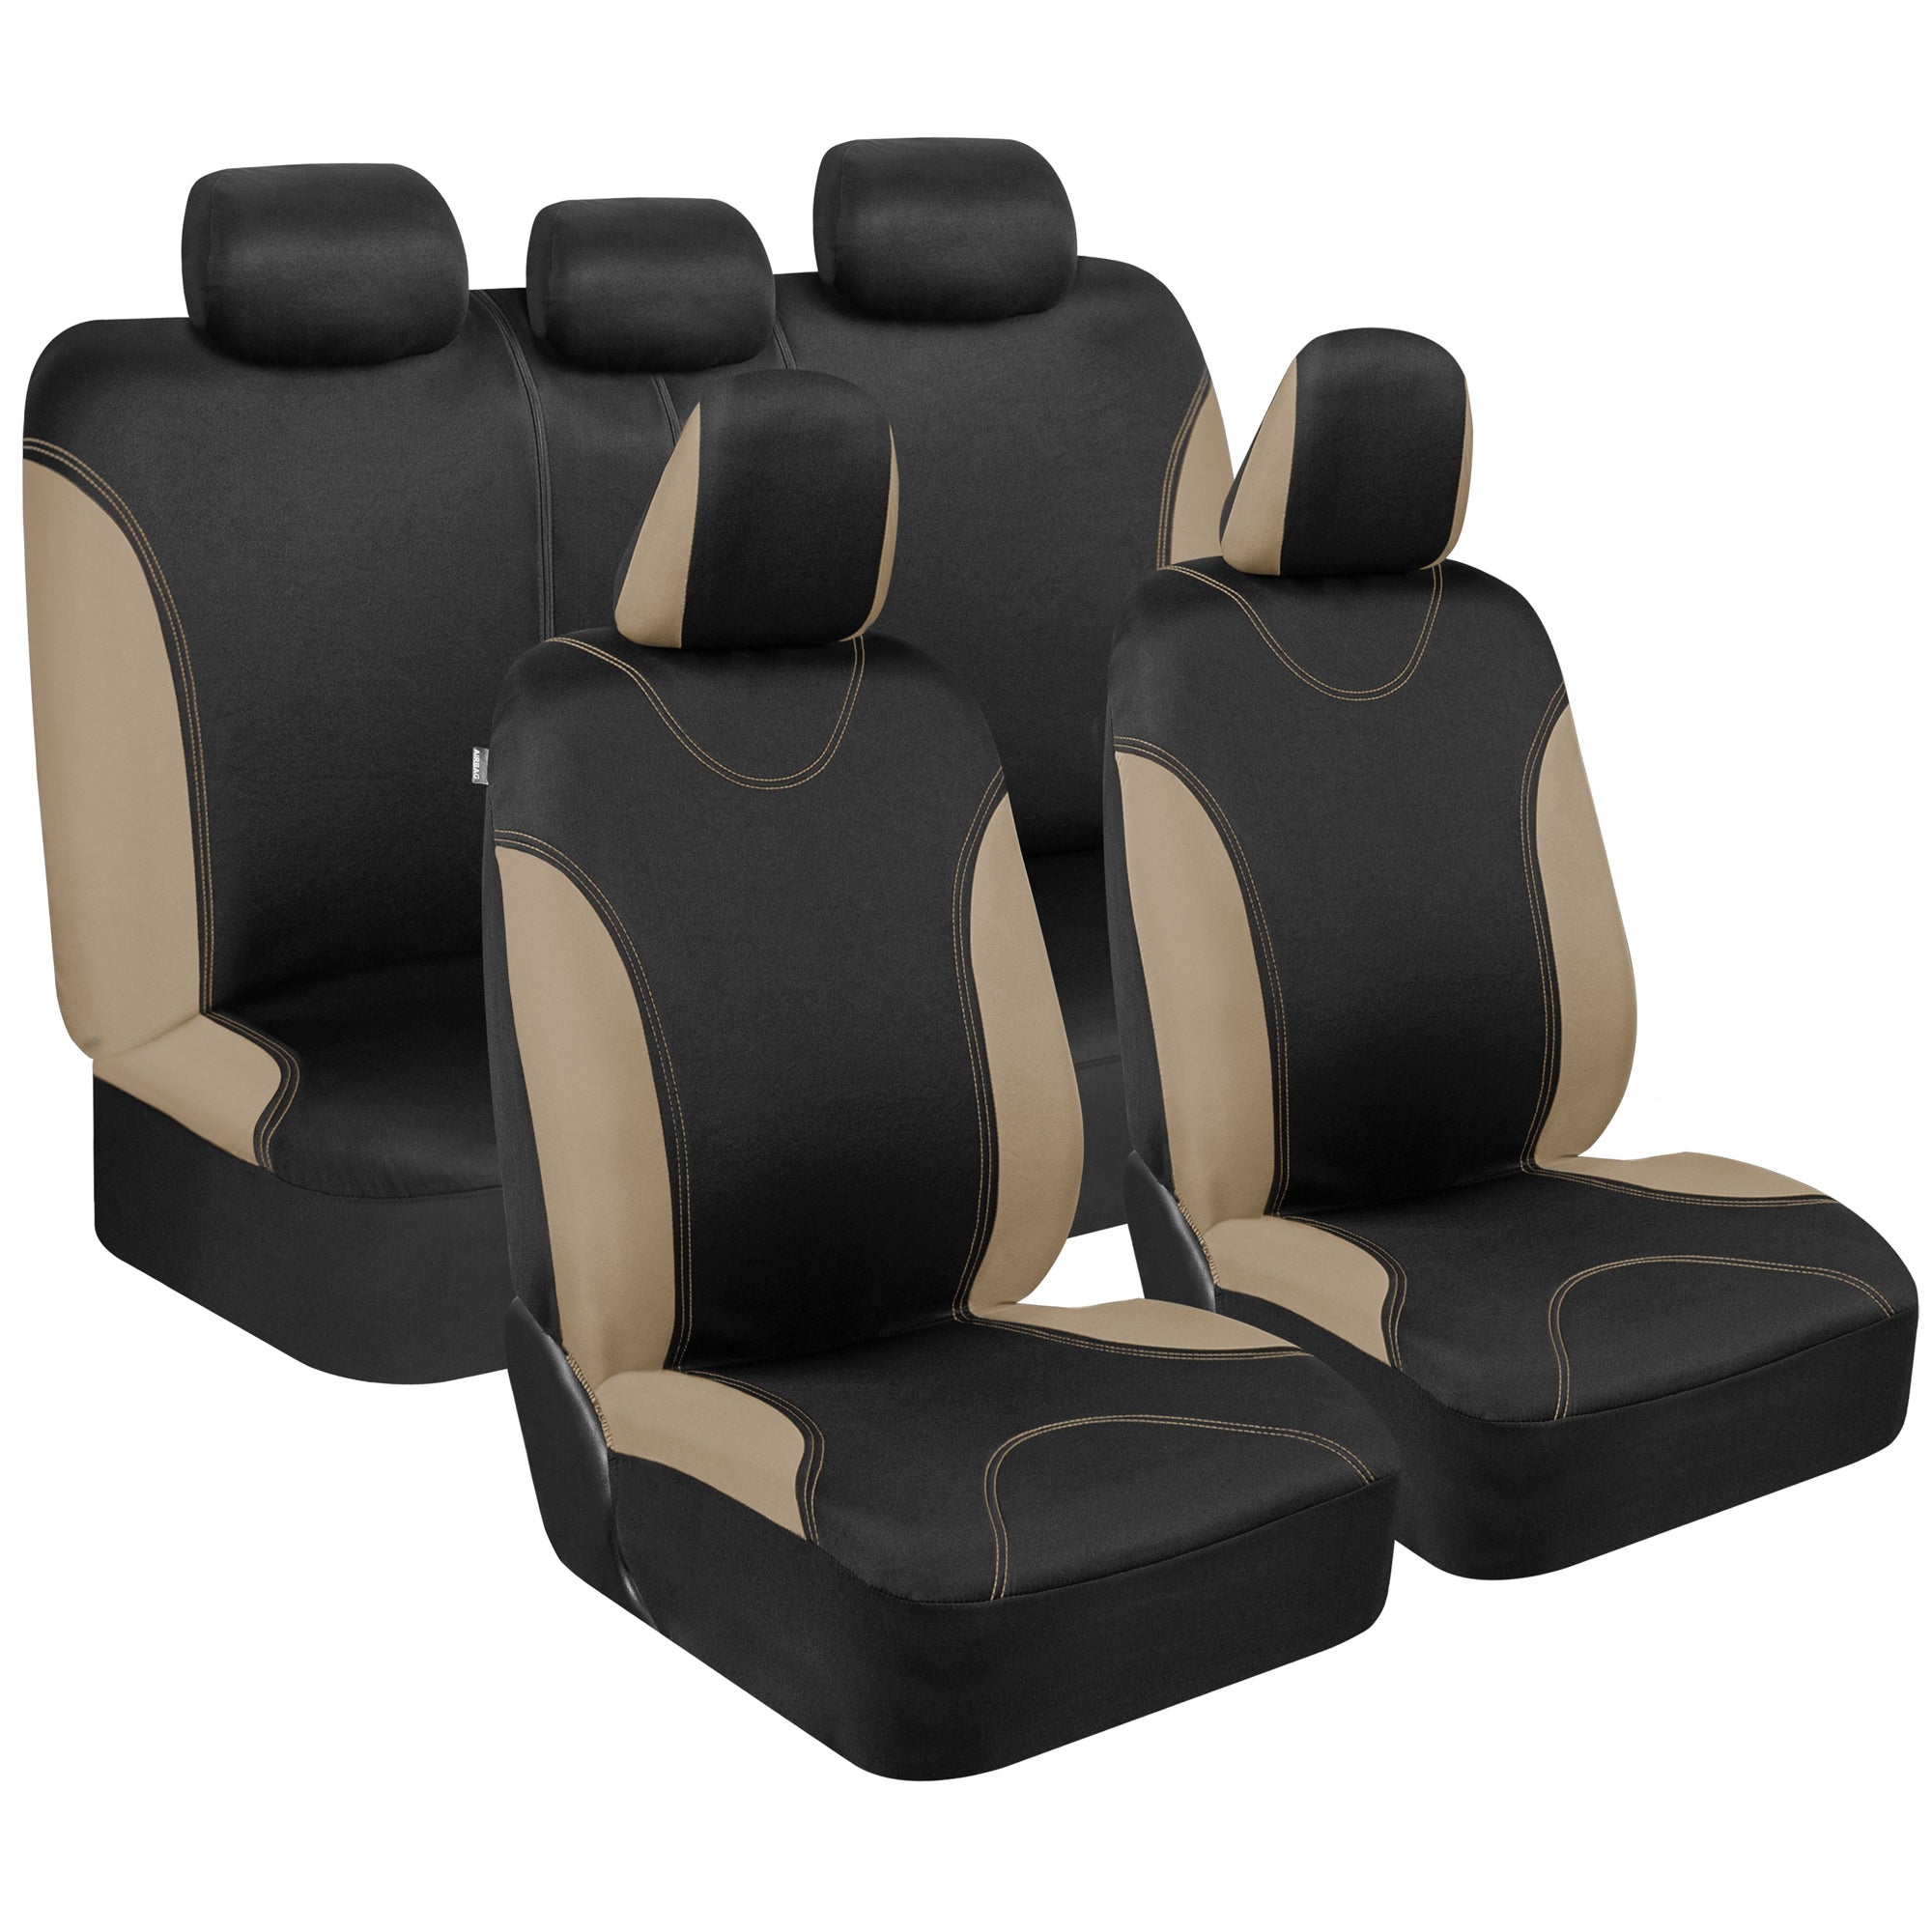 BDK UltraSleek Beige Seat Covers for Cars Full Set, Two-Tone Front Seat Covers with Matching Back Seat Cover, Stylish Car Seat Protectors with Split Bench Design, Automotive Interior Covers - Beige:#C9B27D